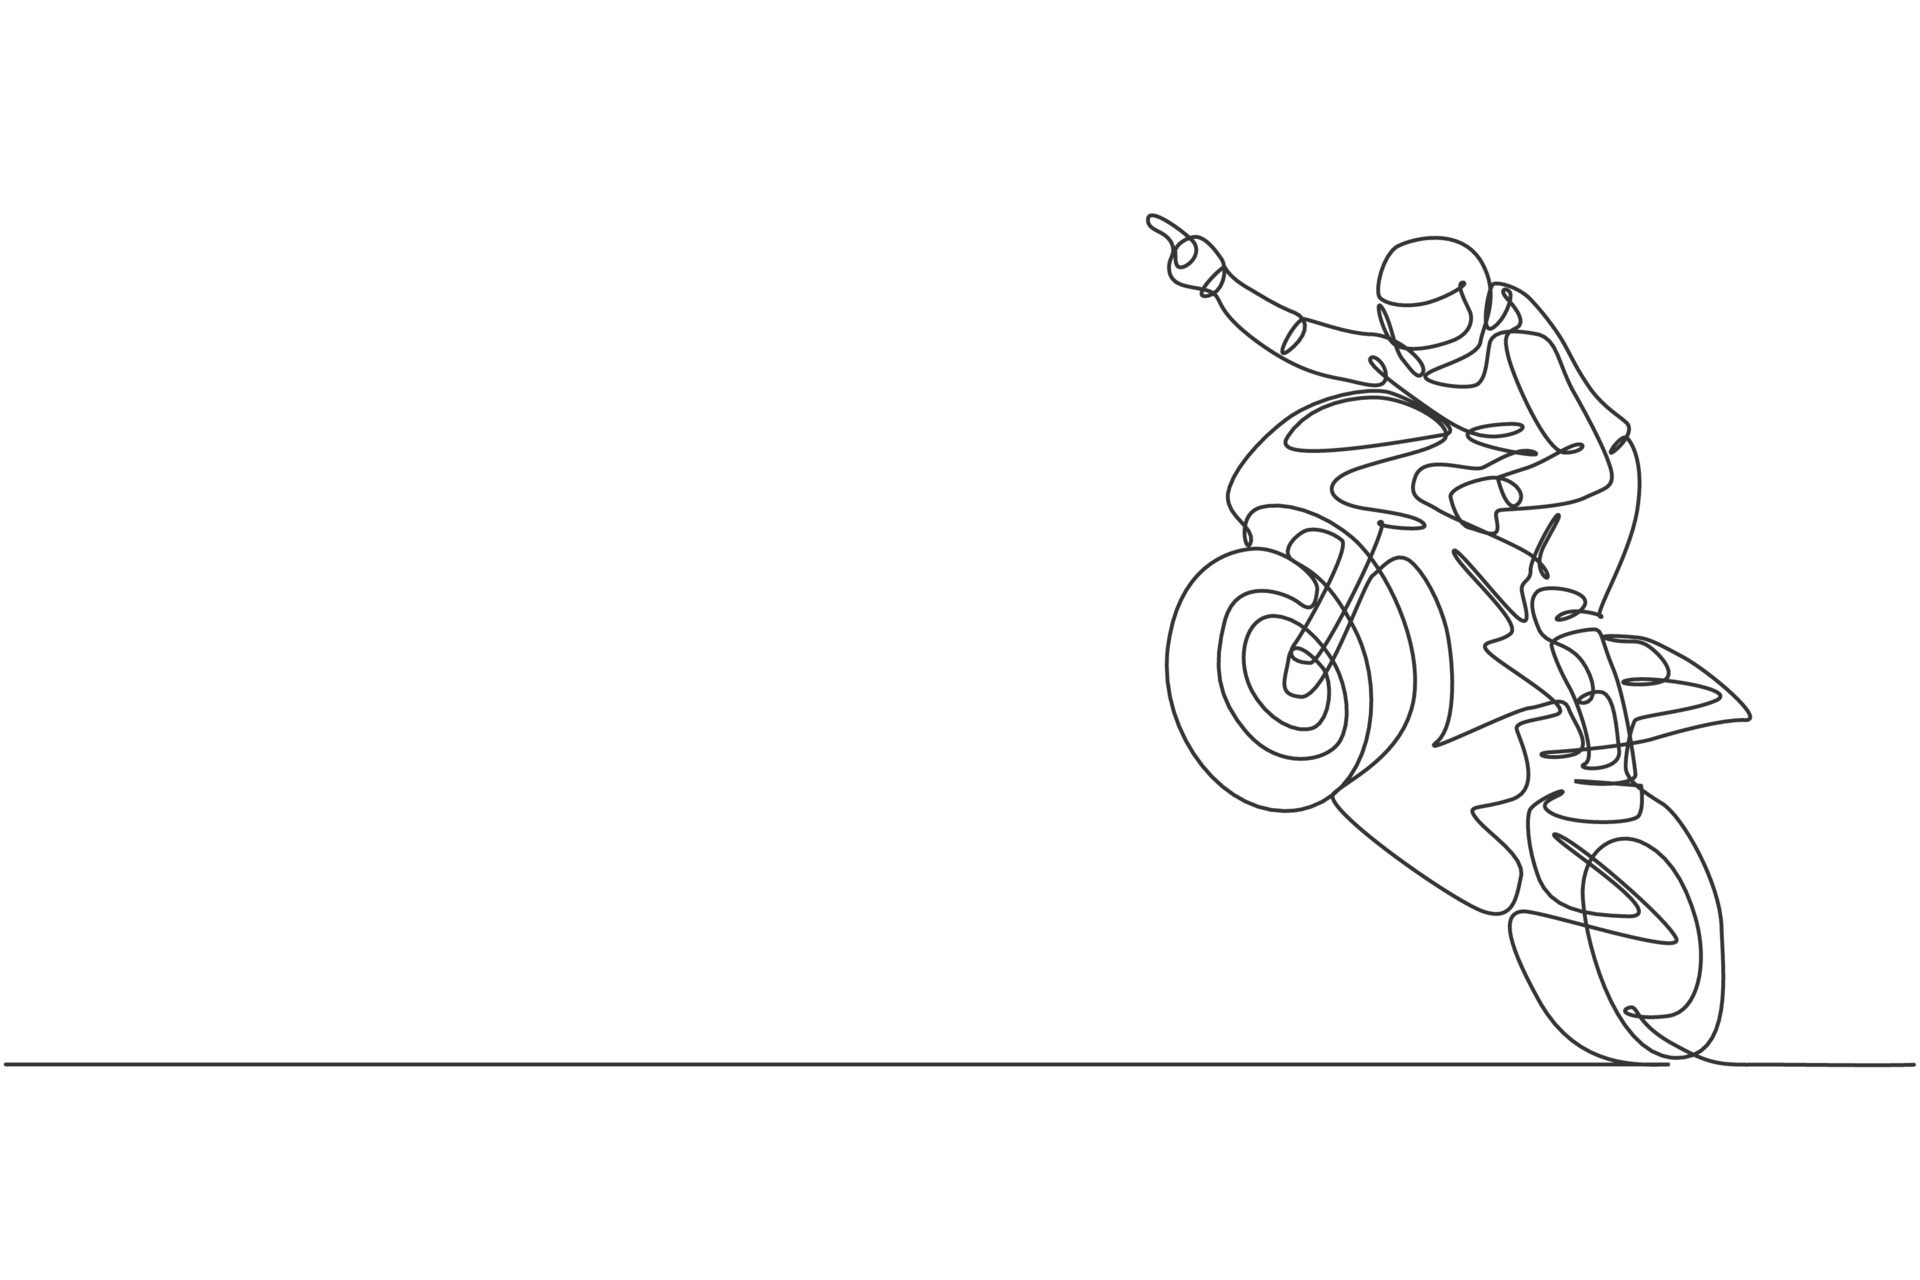 100,000 Motorcycle sketch Vector Images | Depositphotos